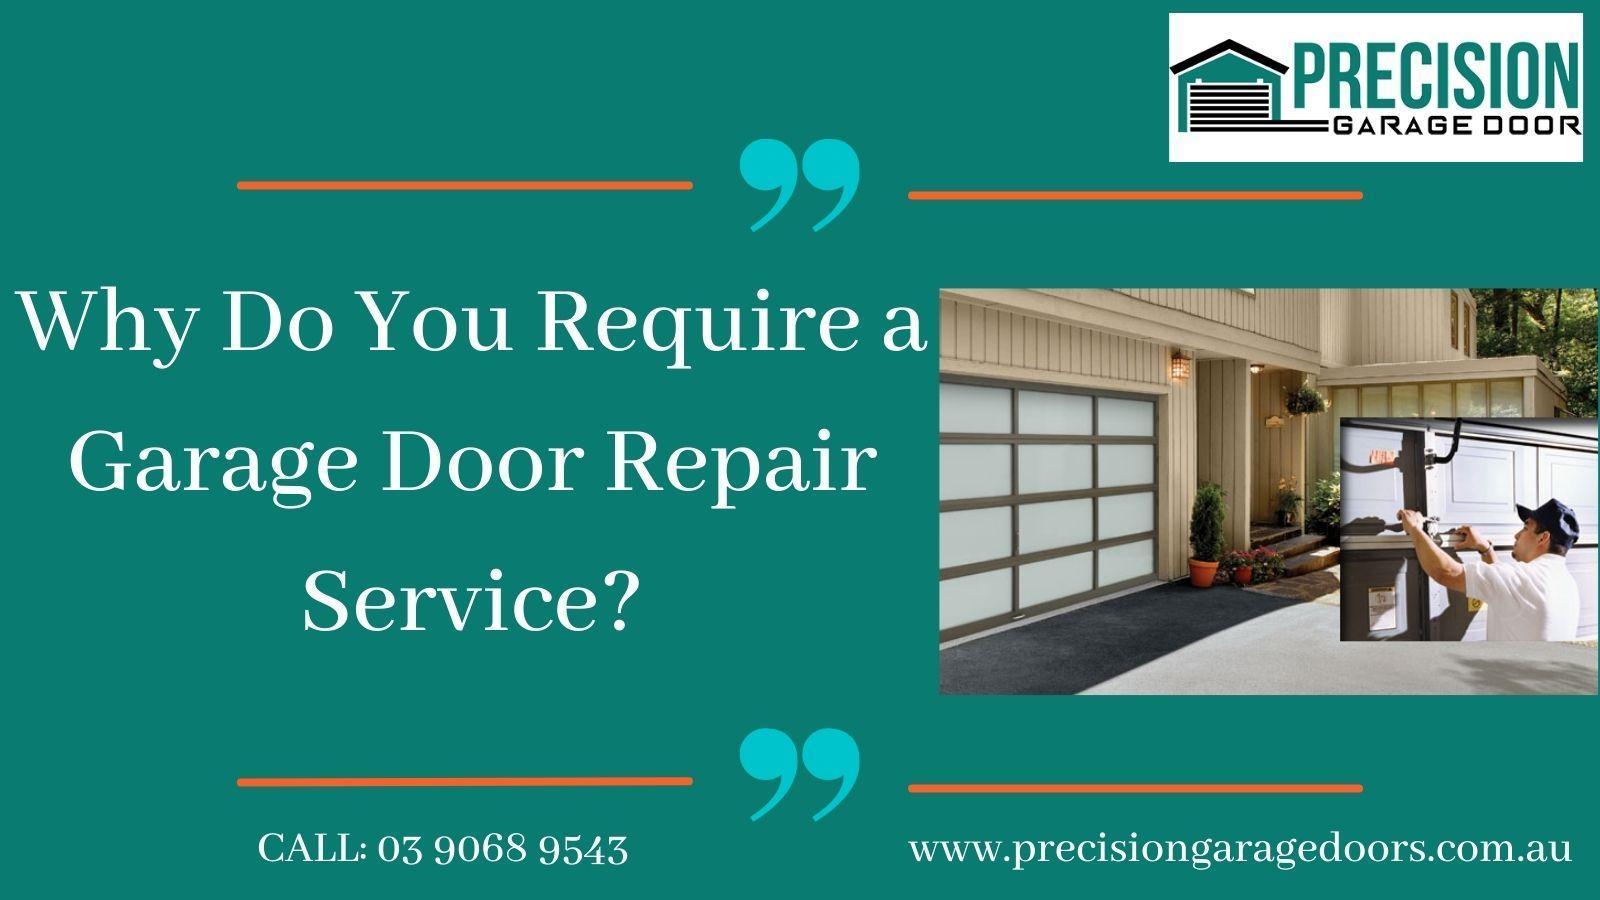 Why Do You Require a Garage Door Repair Service